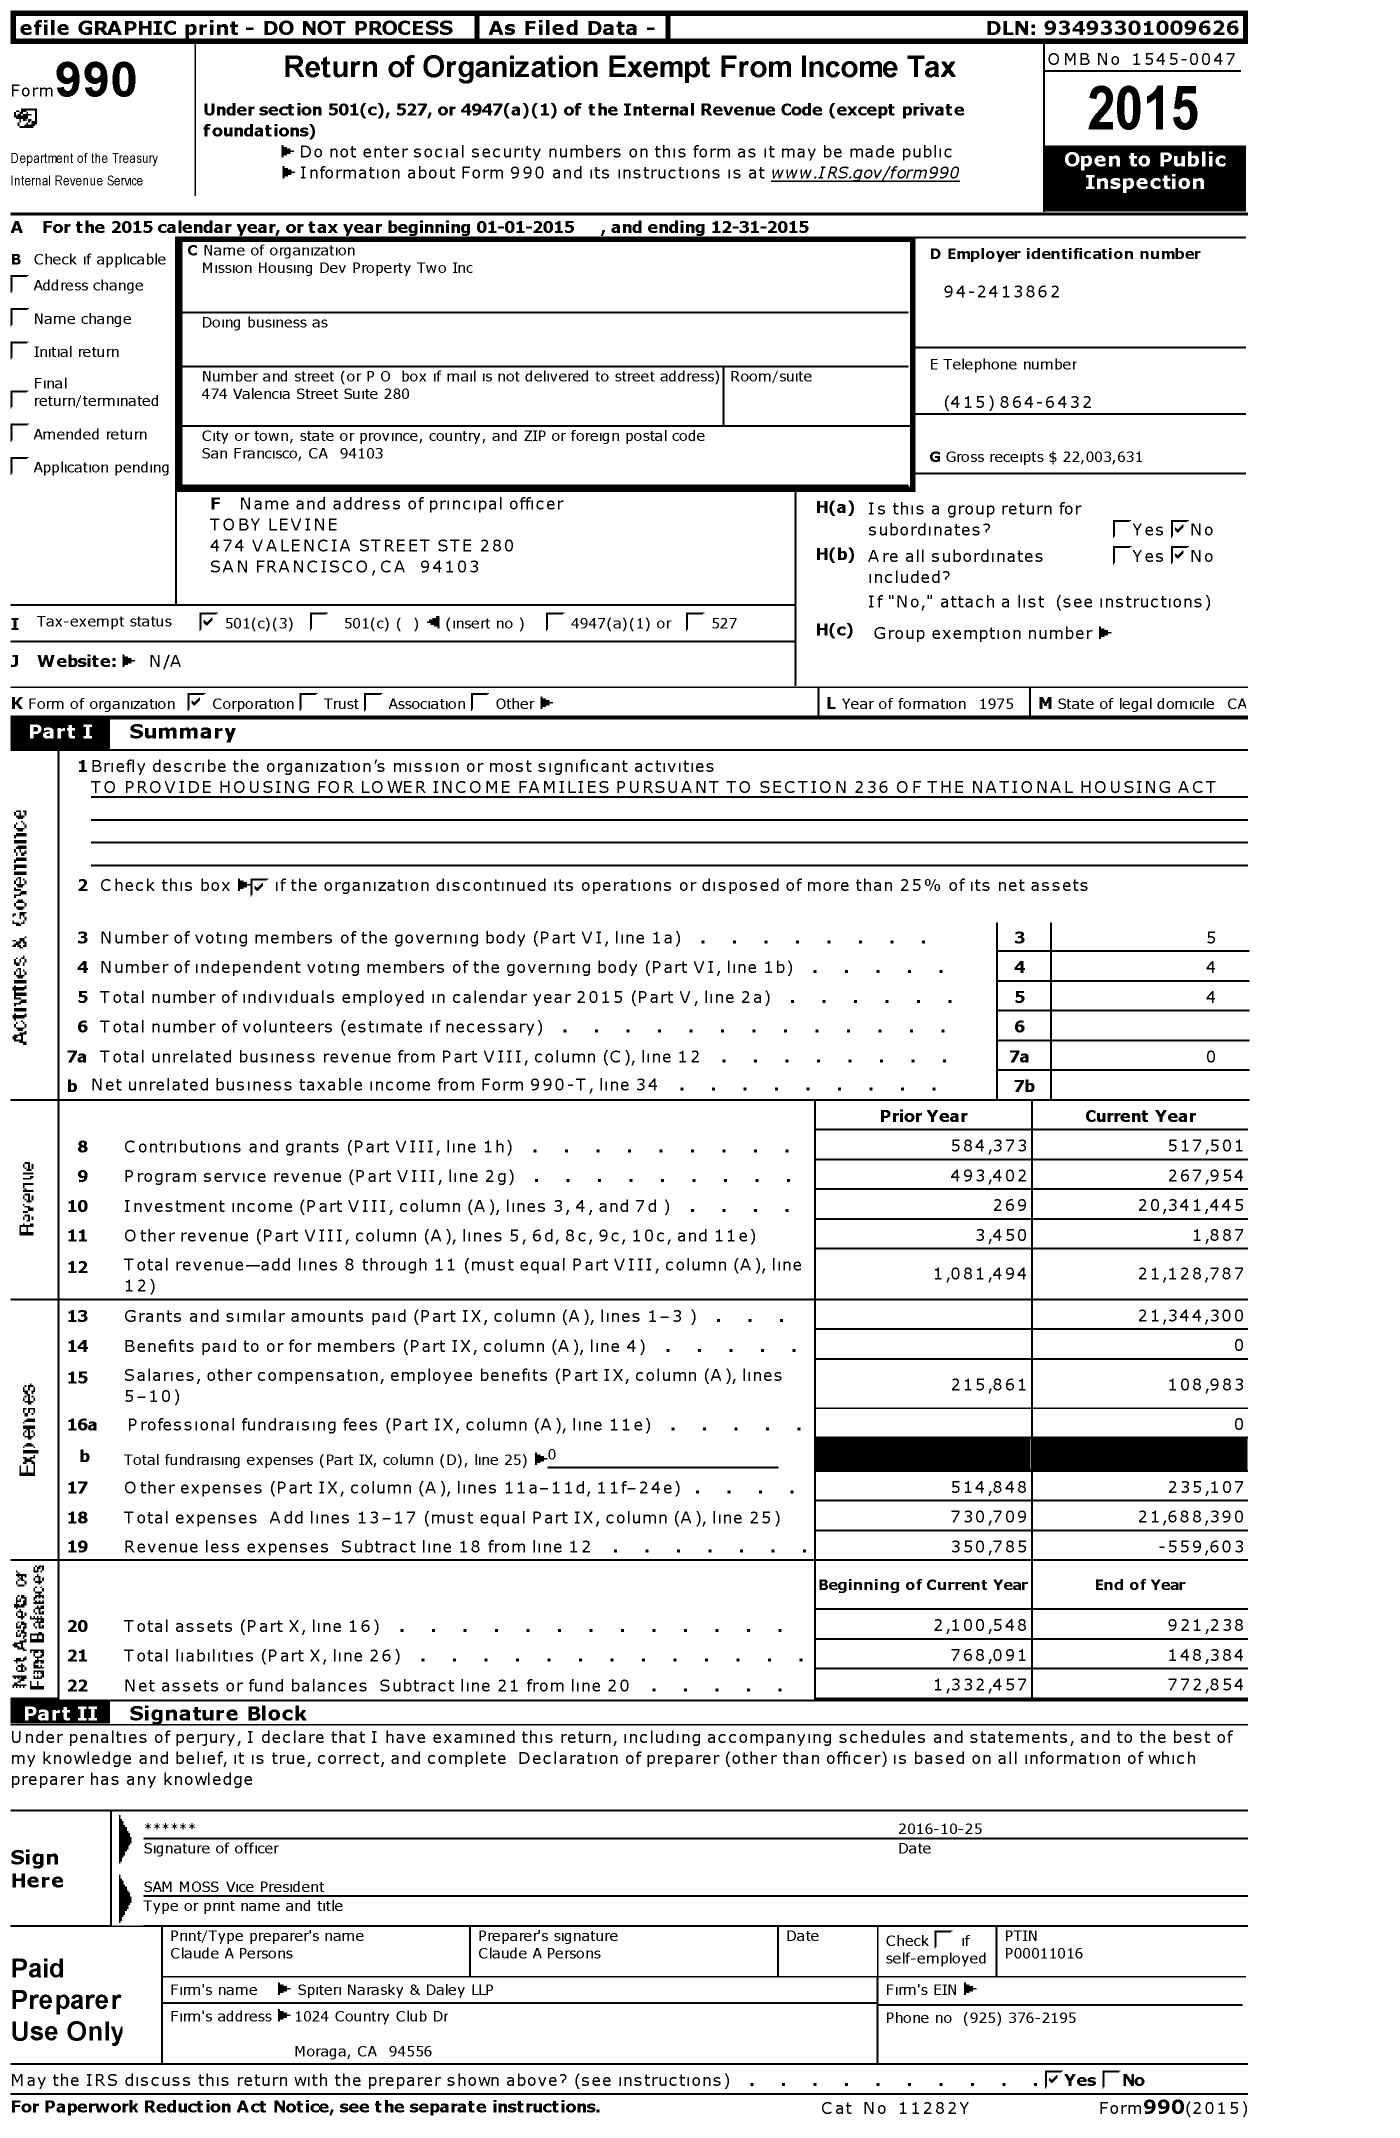 Image of first page of 2015 Form 990 for Mission Housing Development Property Two